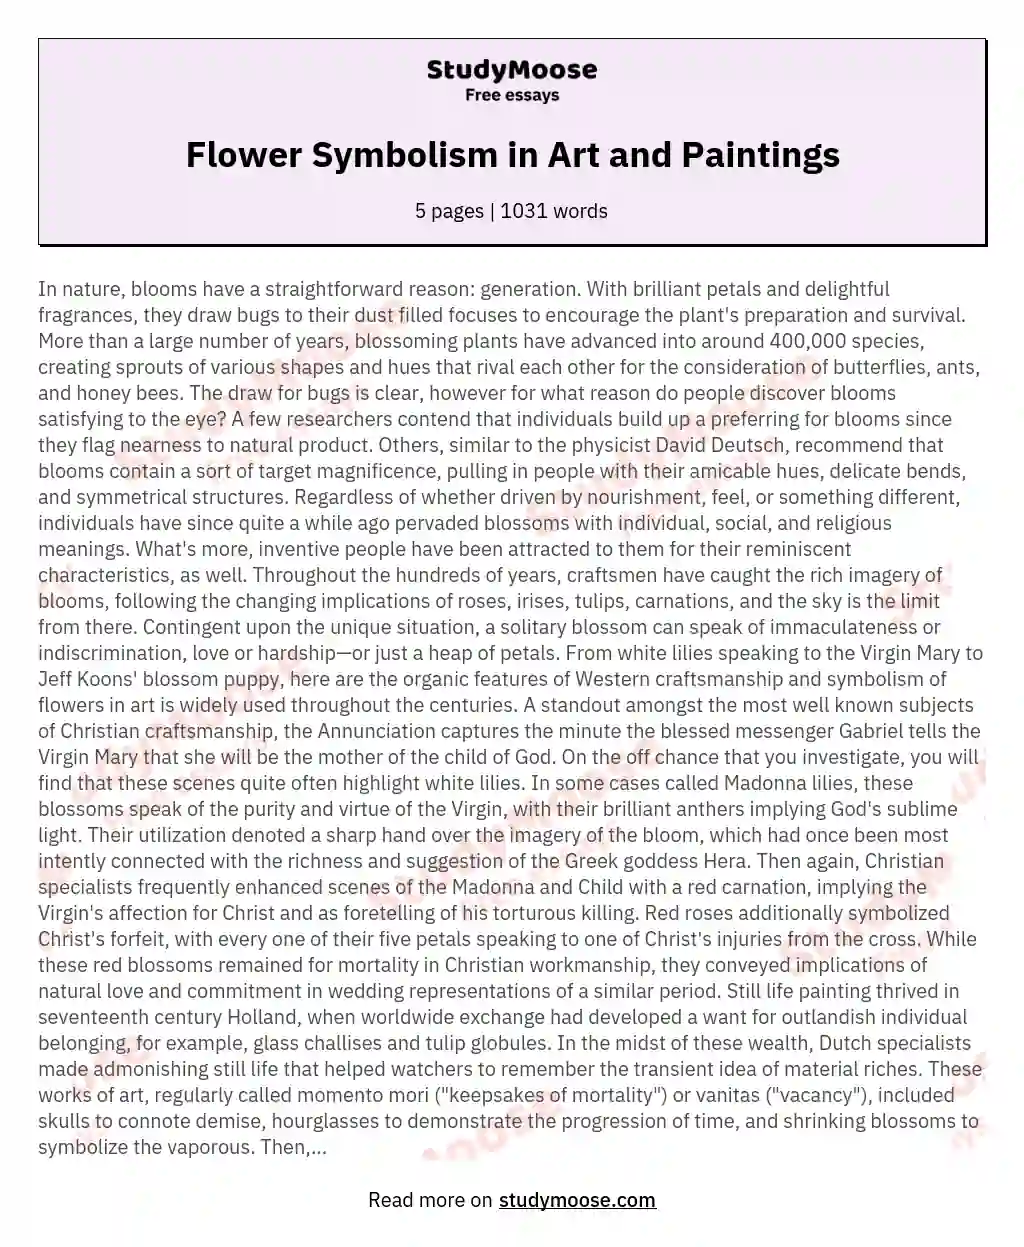 Flower Symbolism in Art and Paintings essay